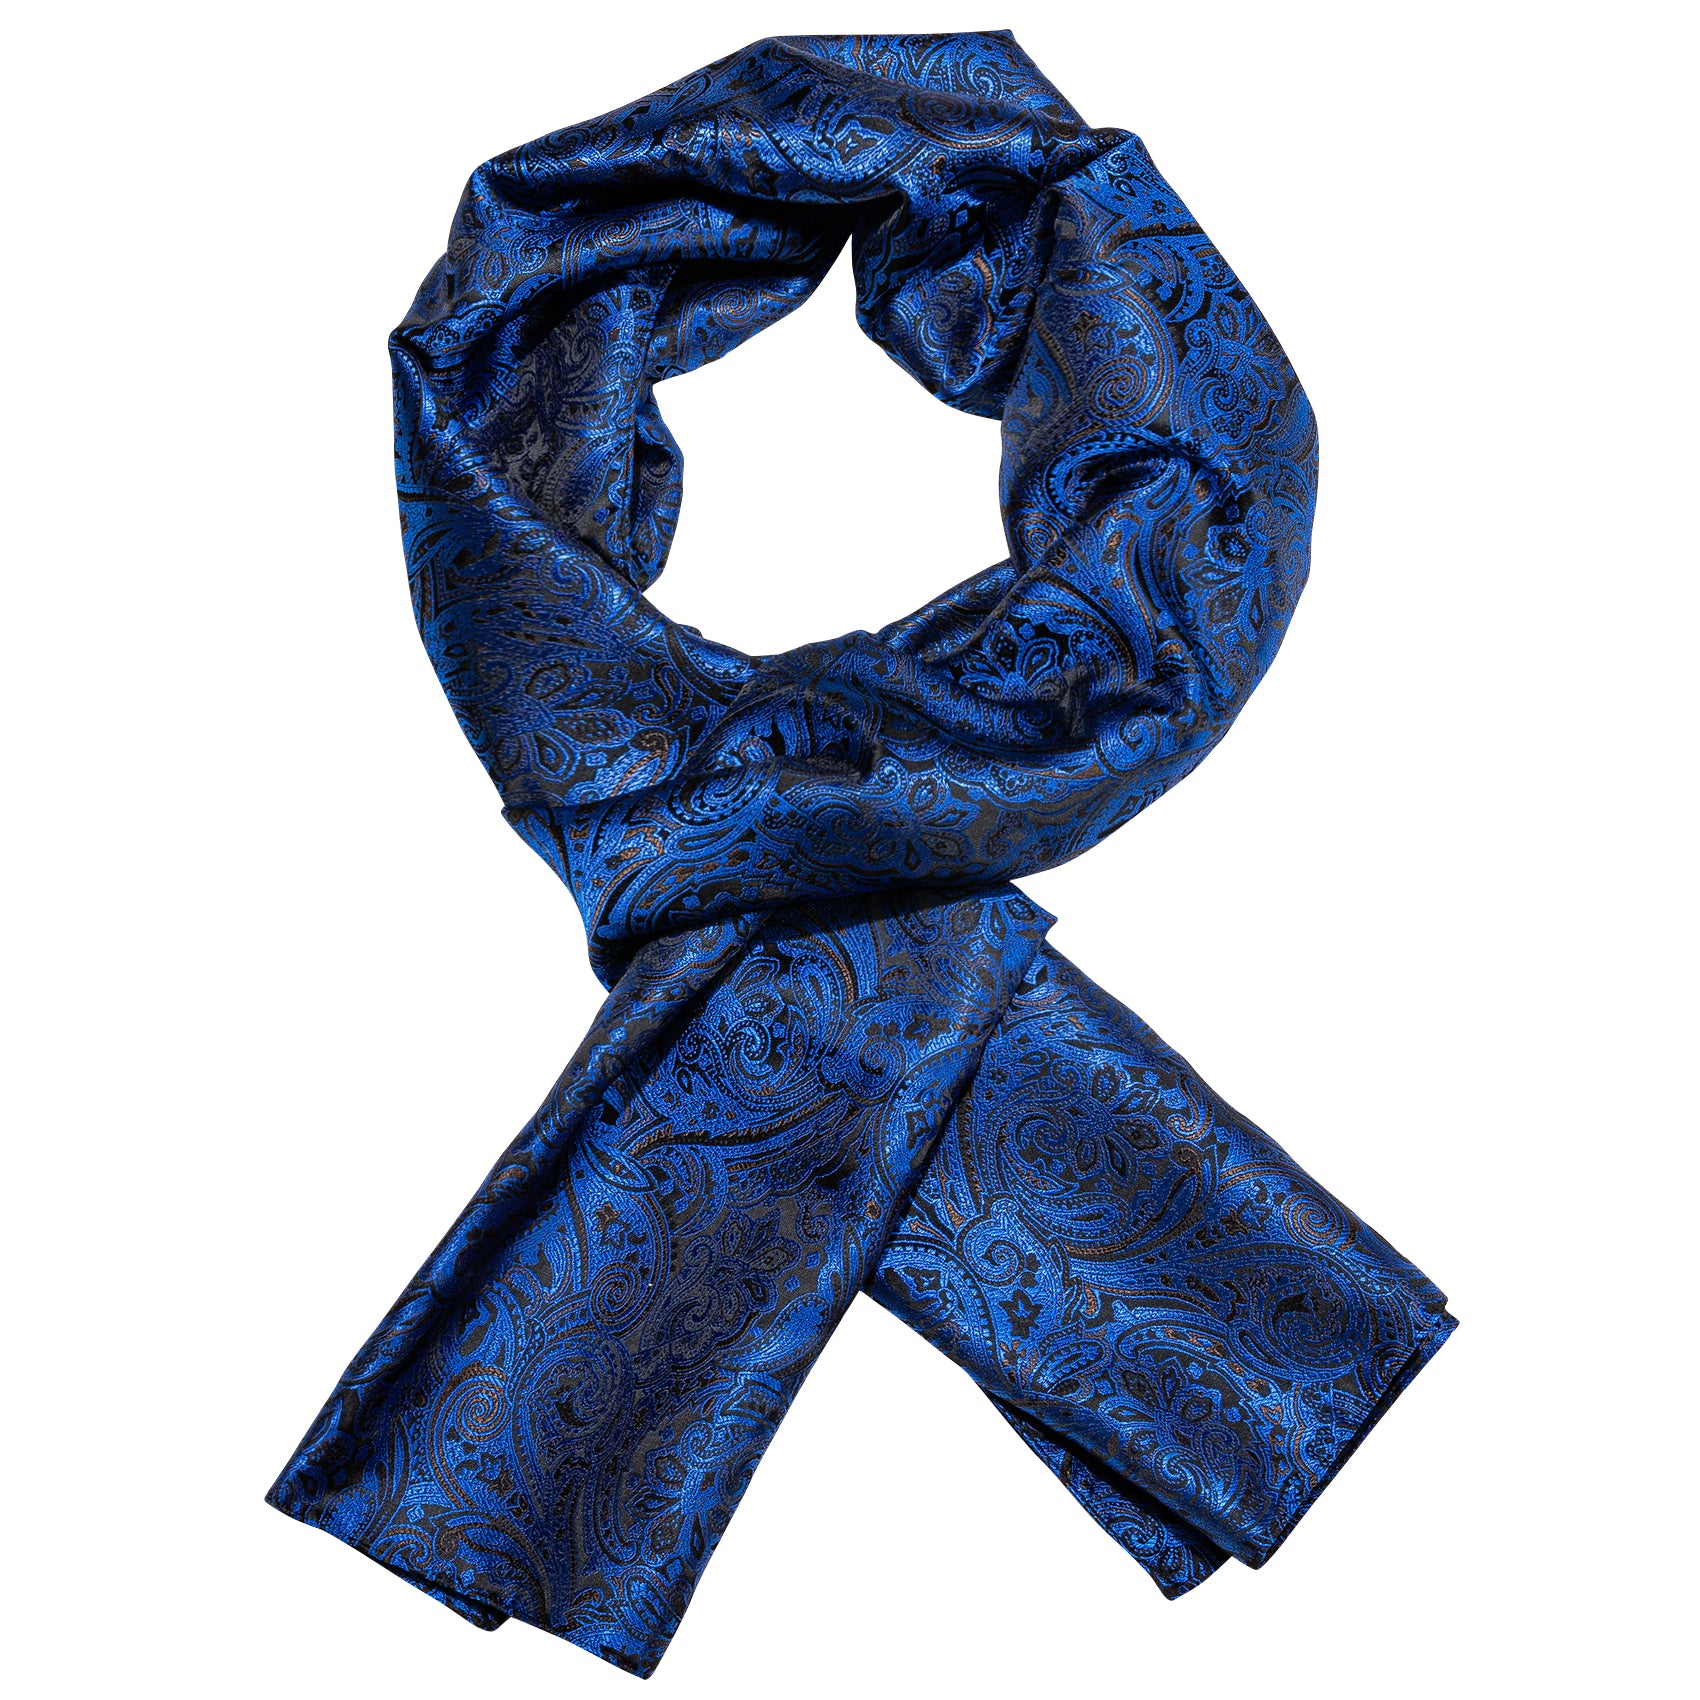 Barry.wang Men's Scarf Luxury Blue Black Floral Scarf